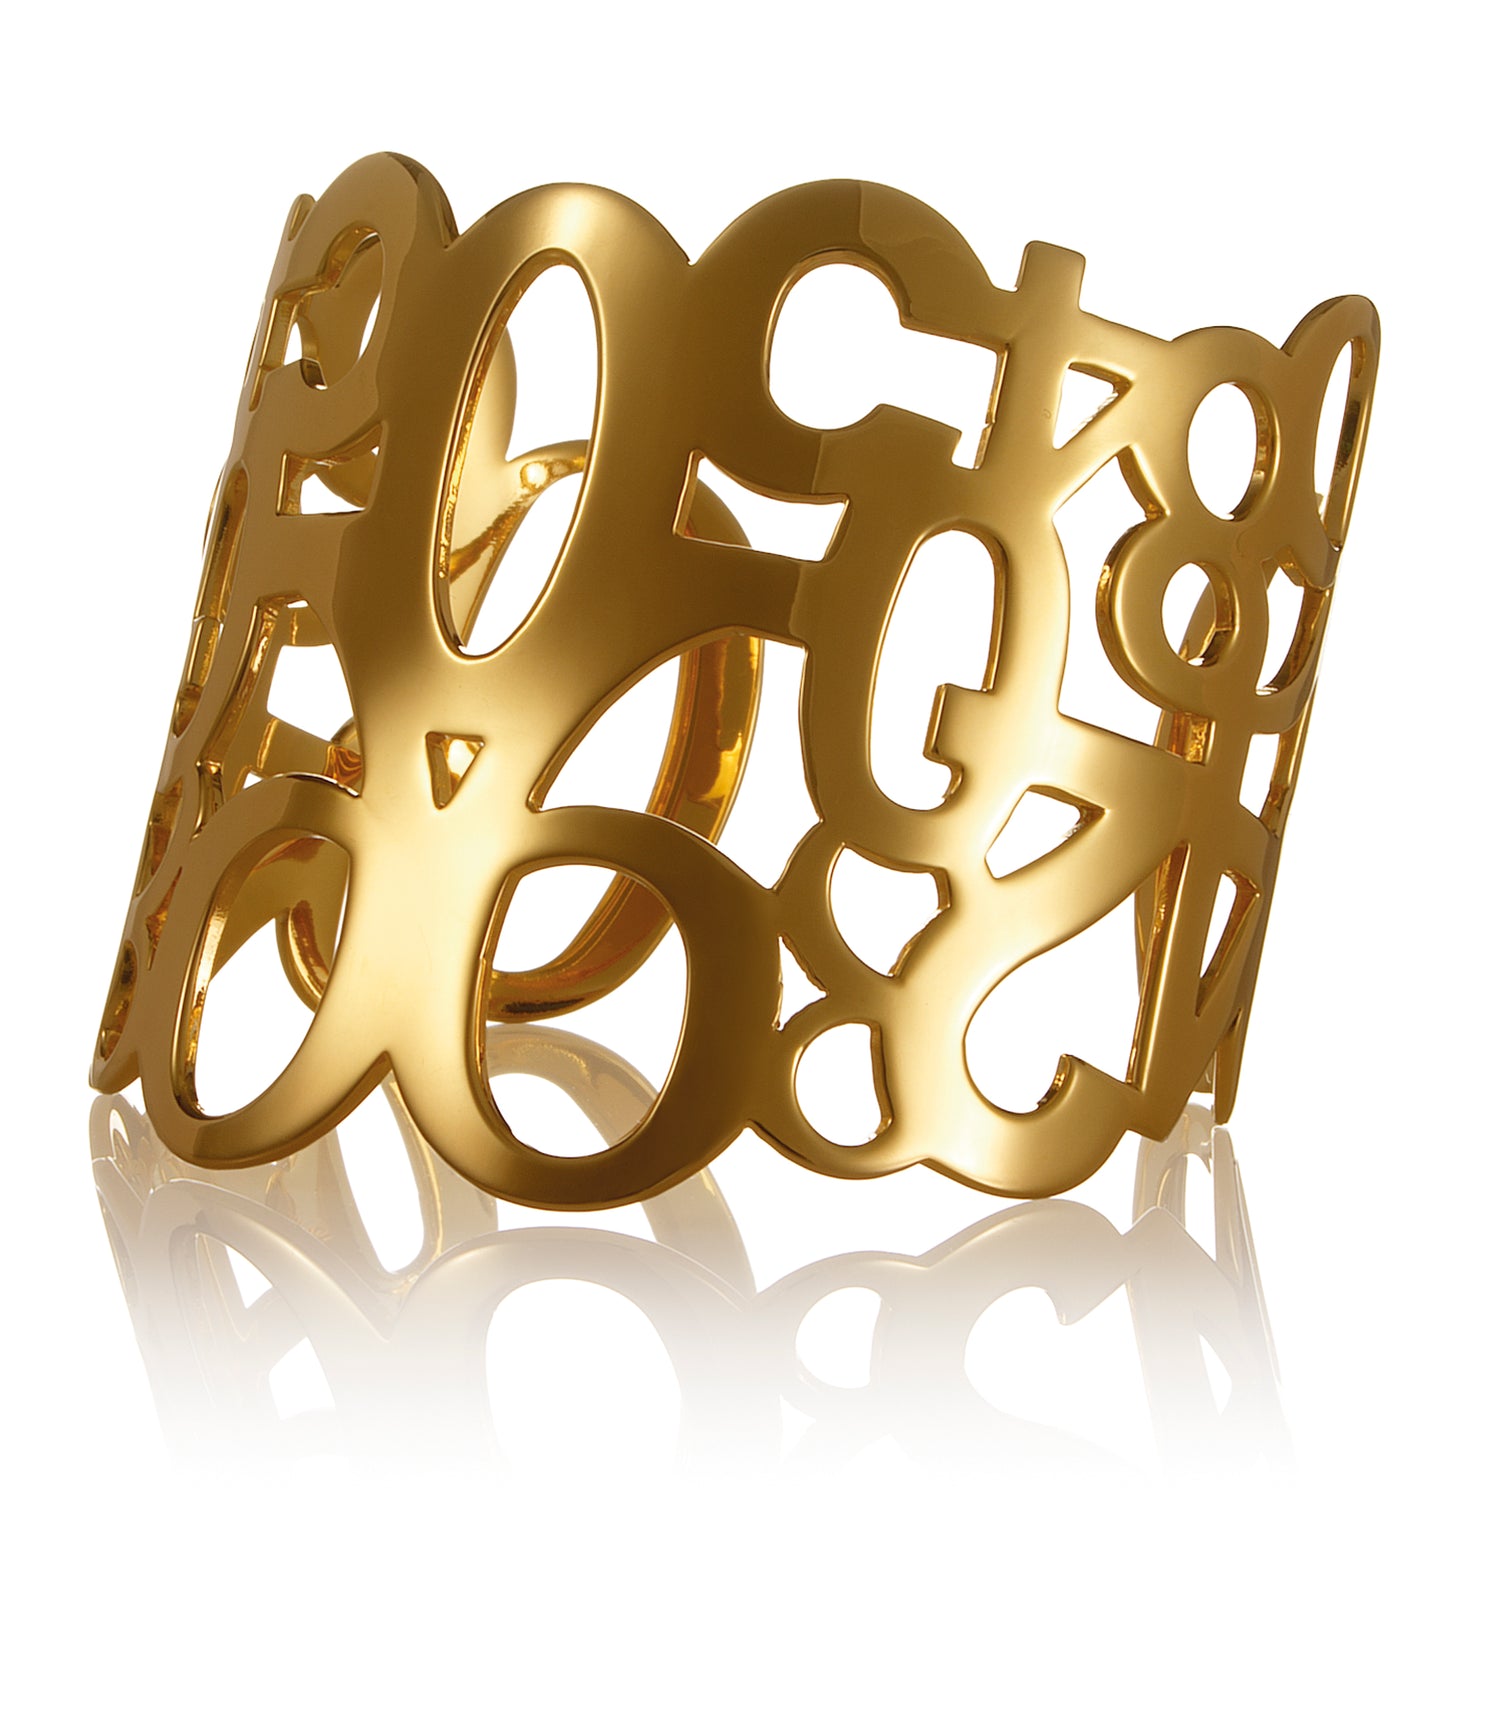 Conceptual chunky cuff bracelet from popular Numbers collection.  Material: 18 karat gold-plated silver.  Size: adjustable, fits any wrist. 